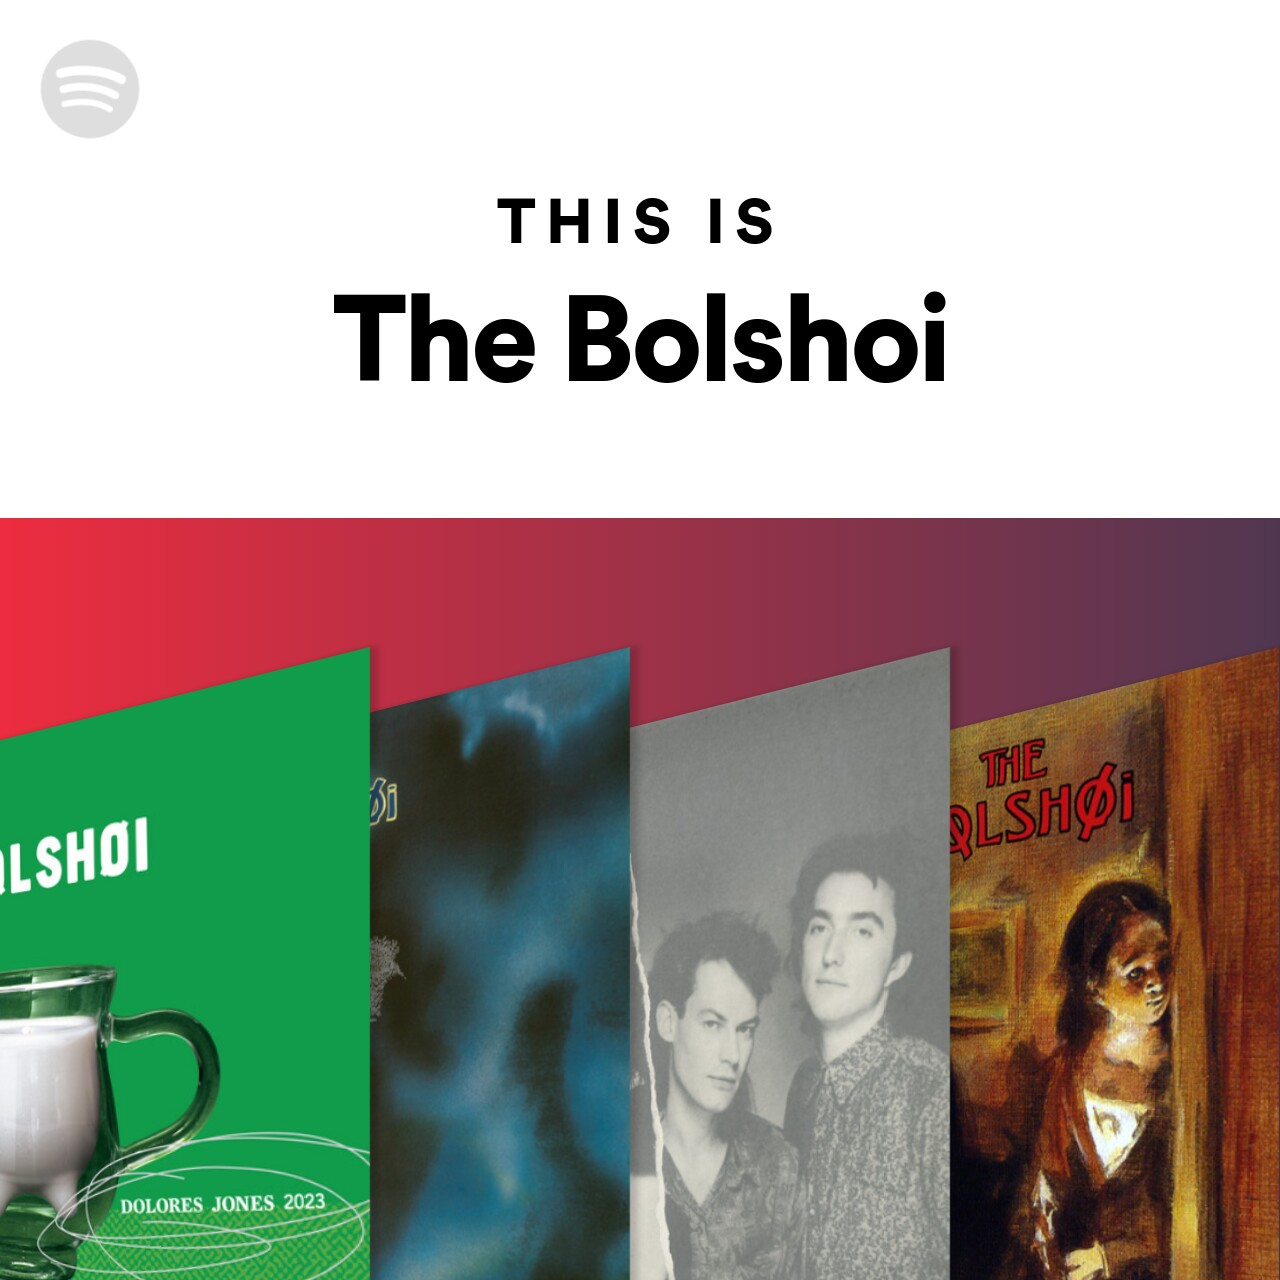 This Is The Bolshoi